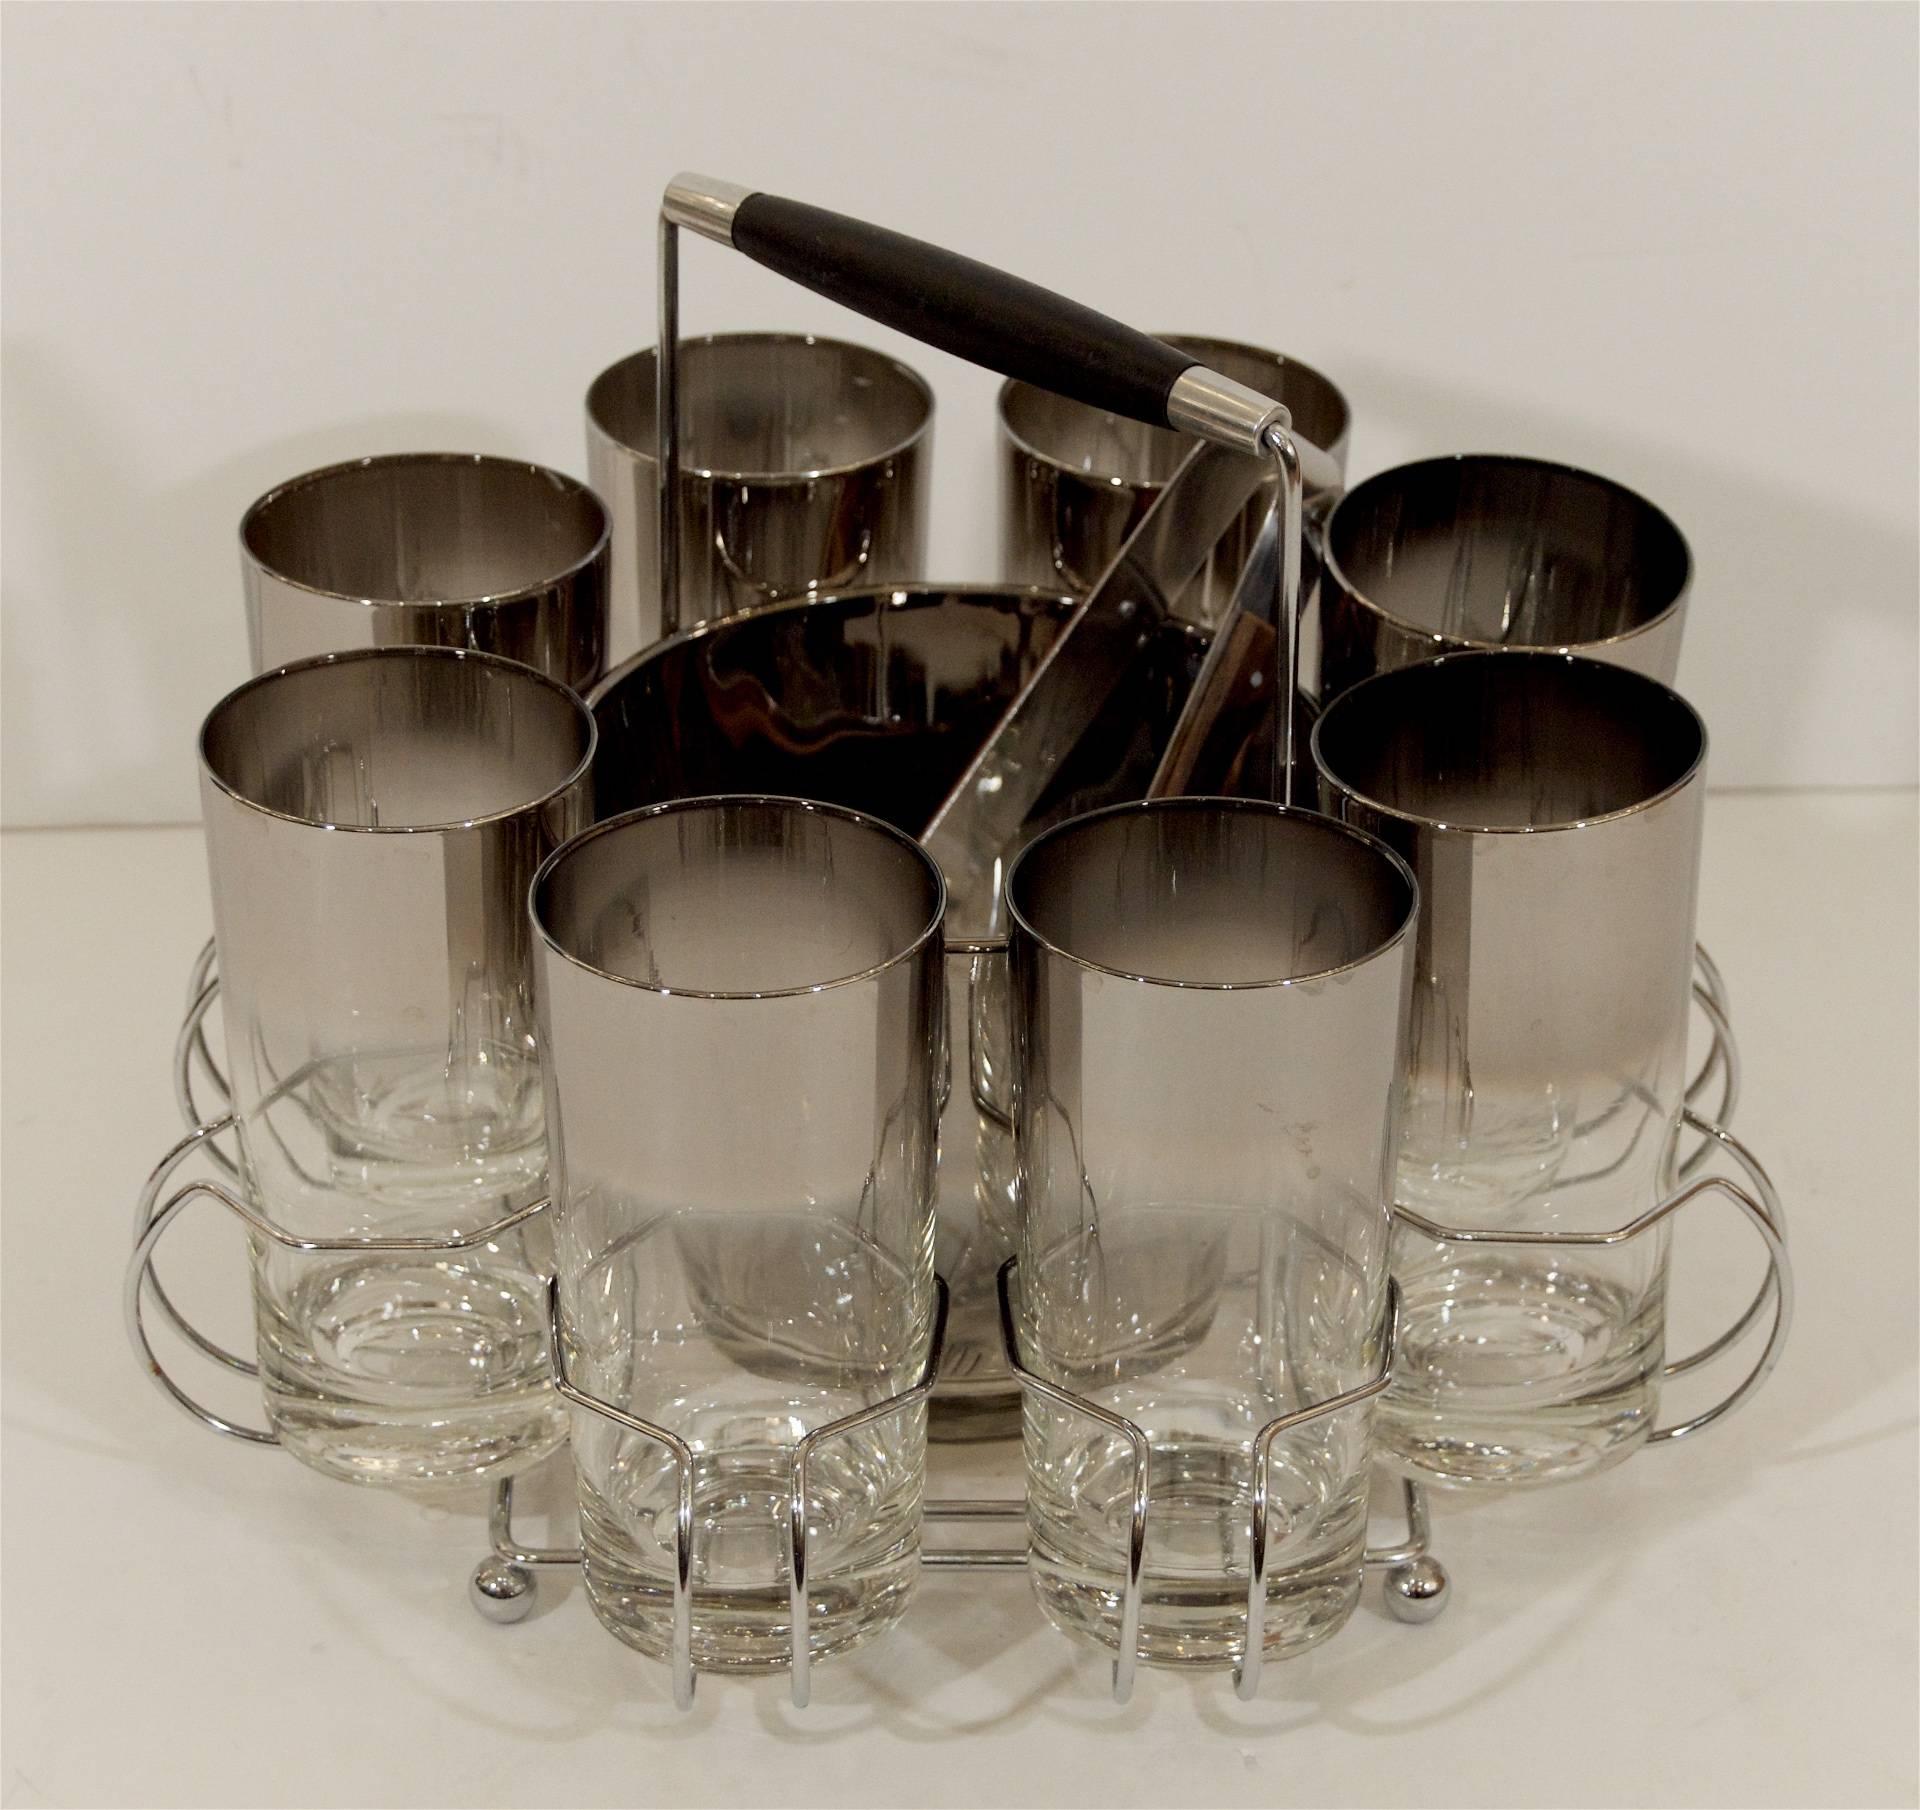 Excellent bar glass set, eight 12 ounce tumbler glasses in chrome carrier, with central ice bucket in an octagonal form, includes tongs.